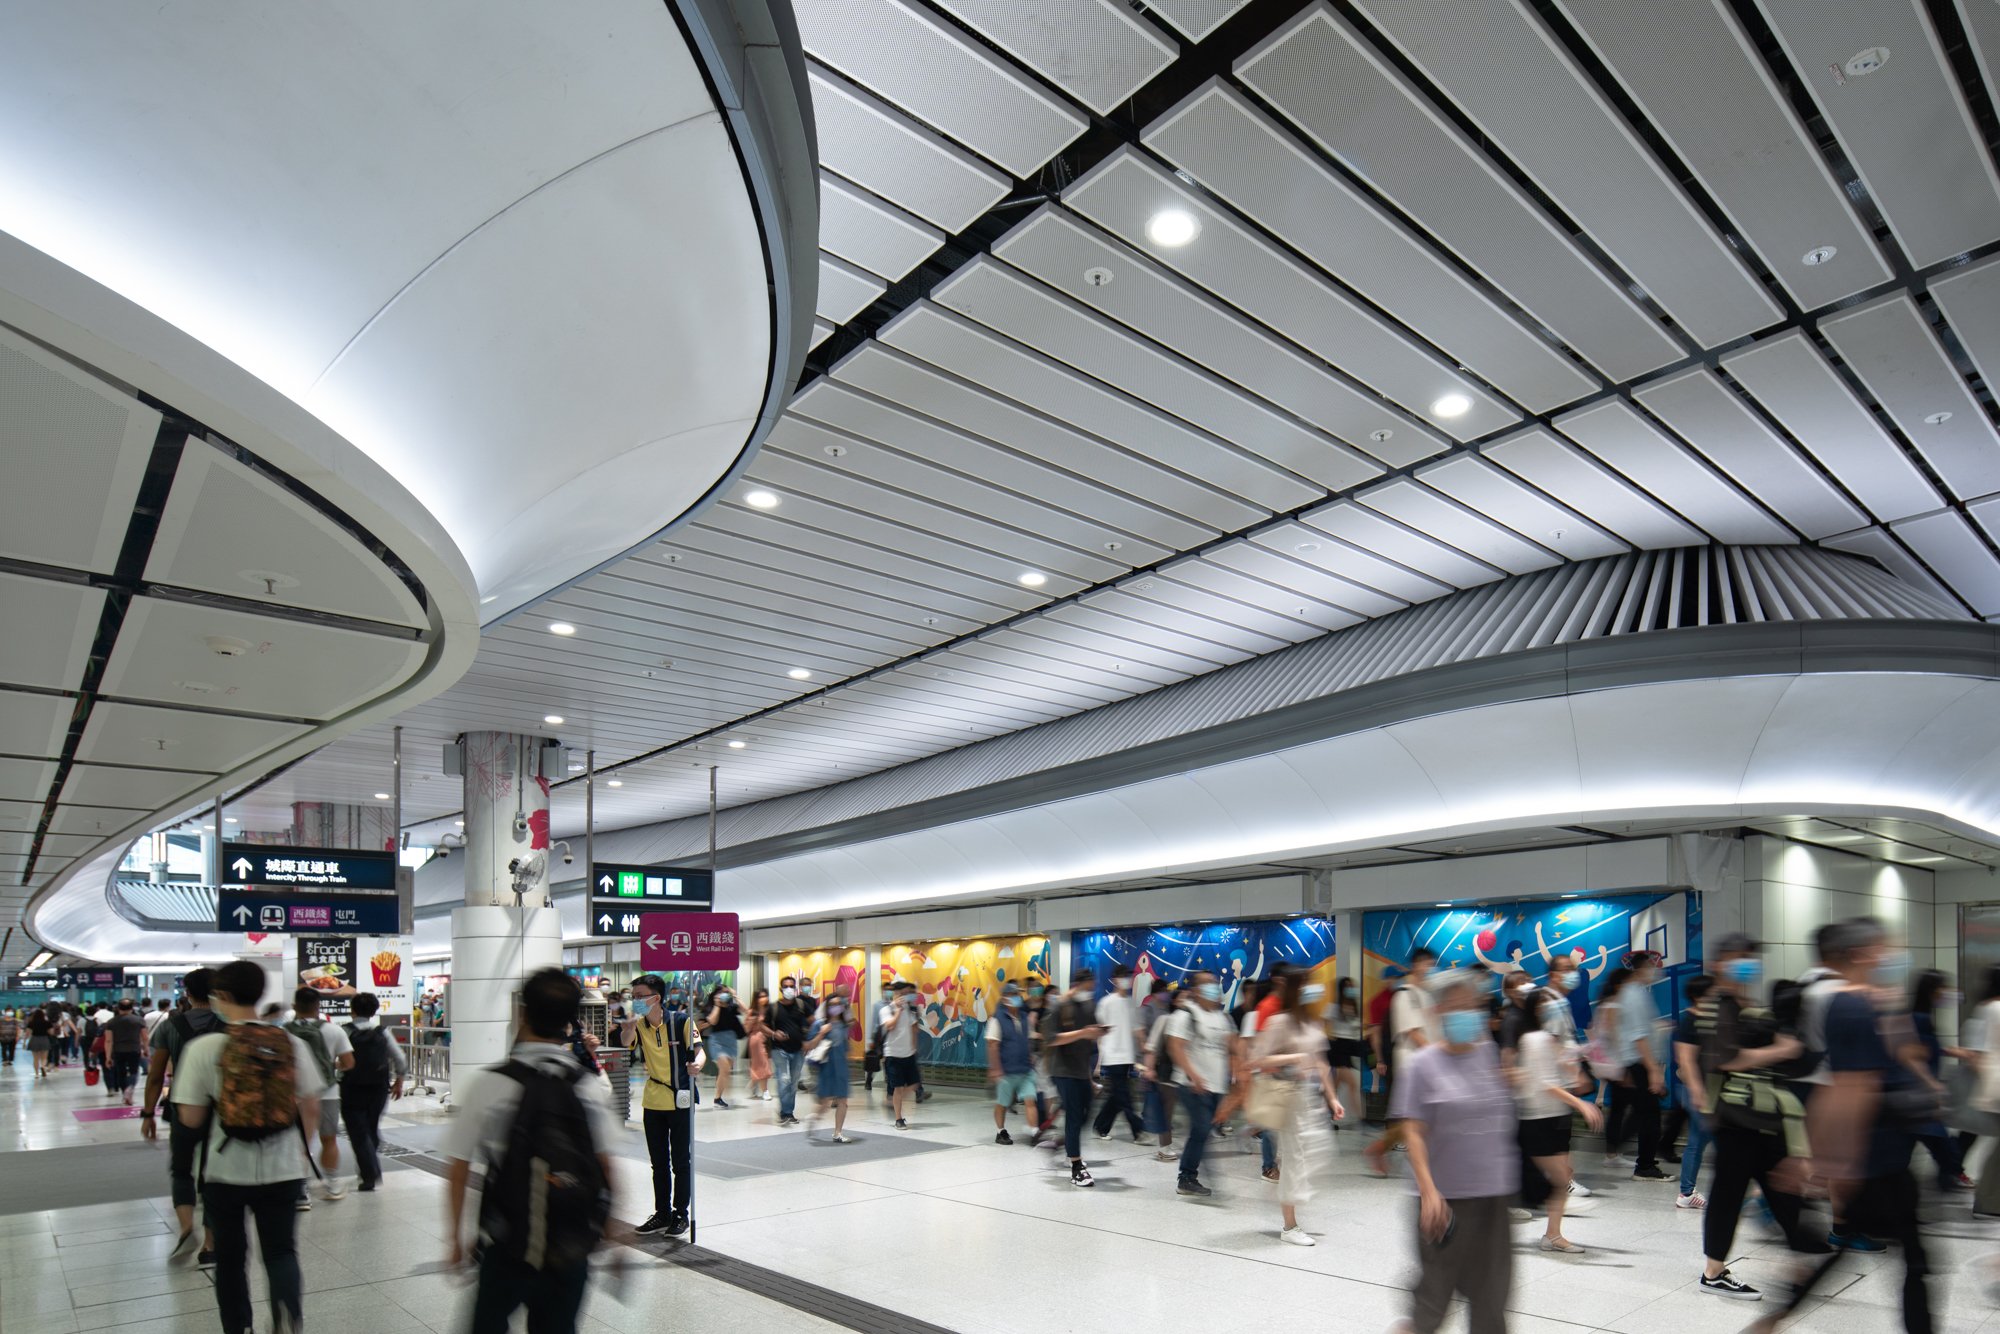  Tuen Ma Line 2021 Hung Hom MTR Station  Designed by / Photographed for Aedas 